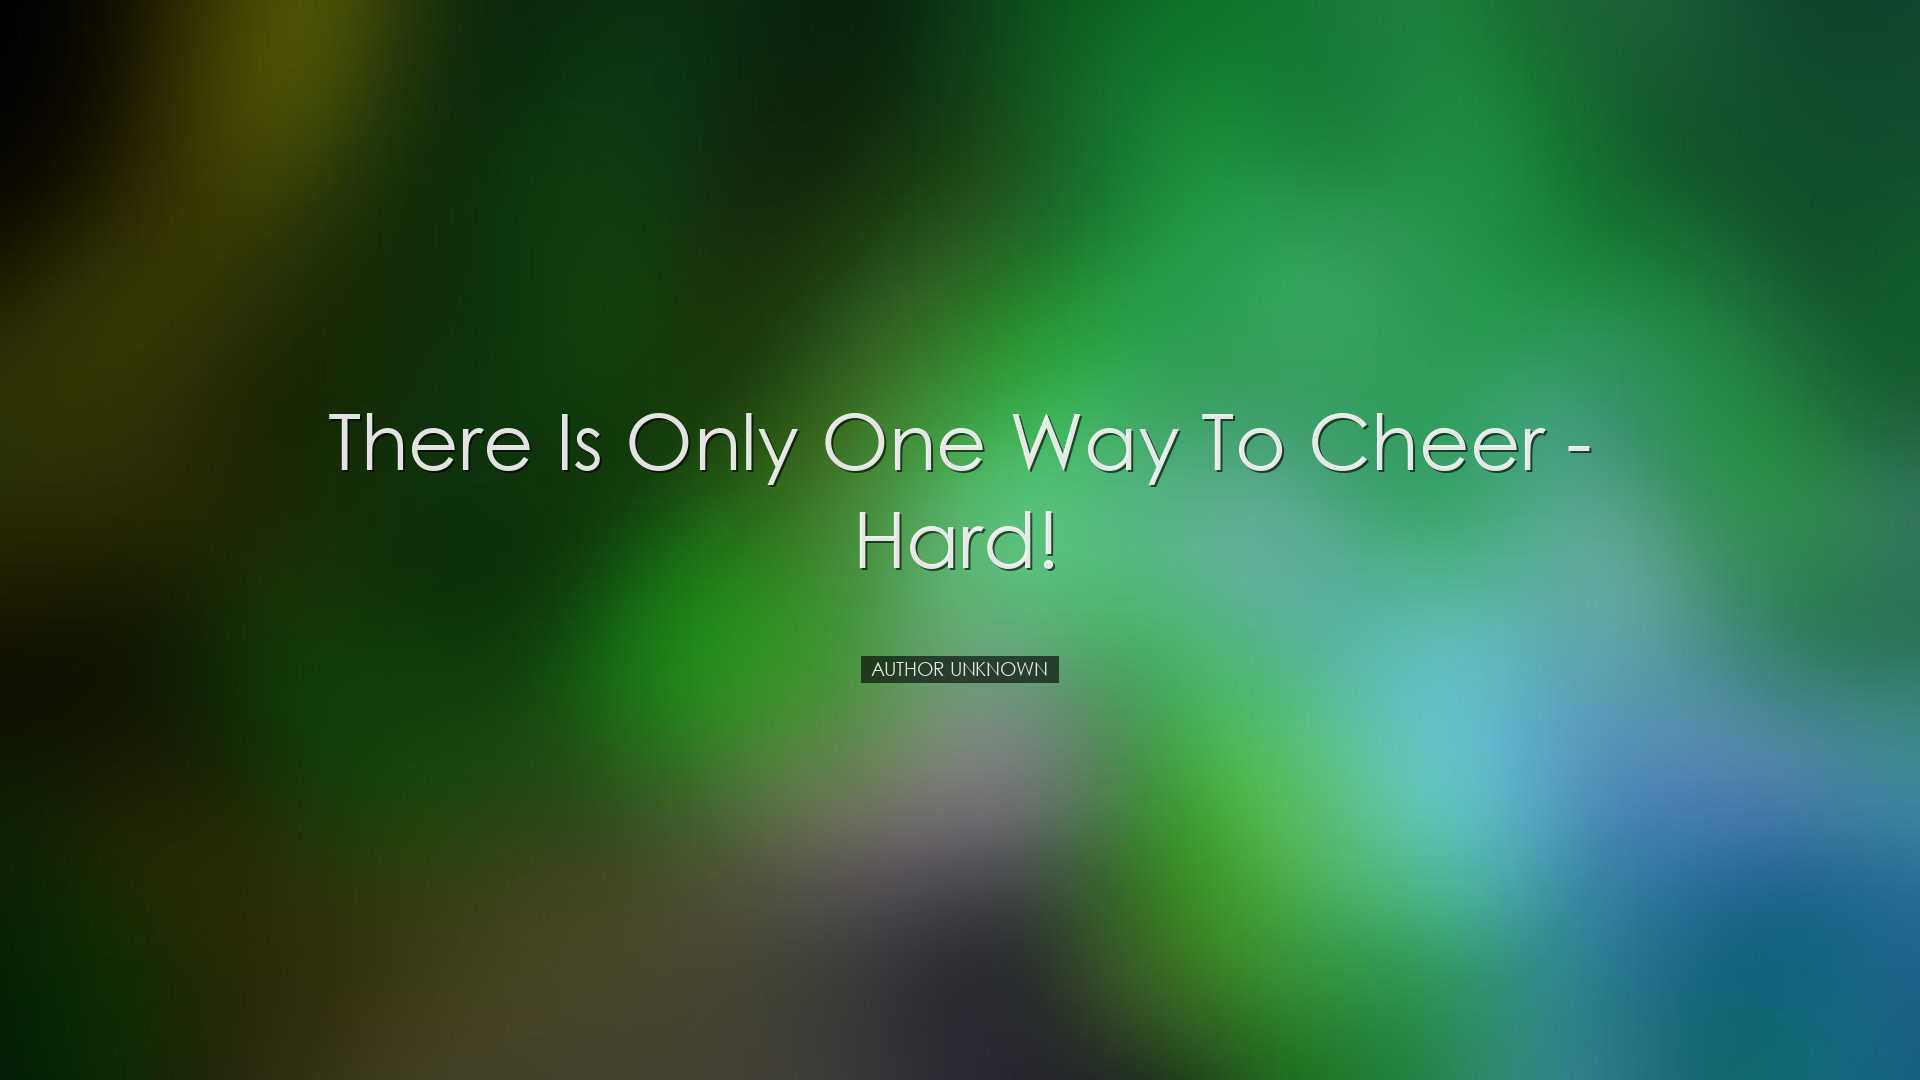 There is only one way to cheer - hard! - Author Unknown